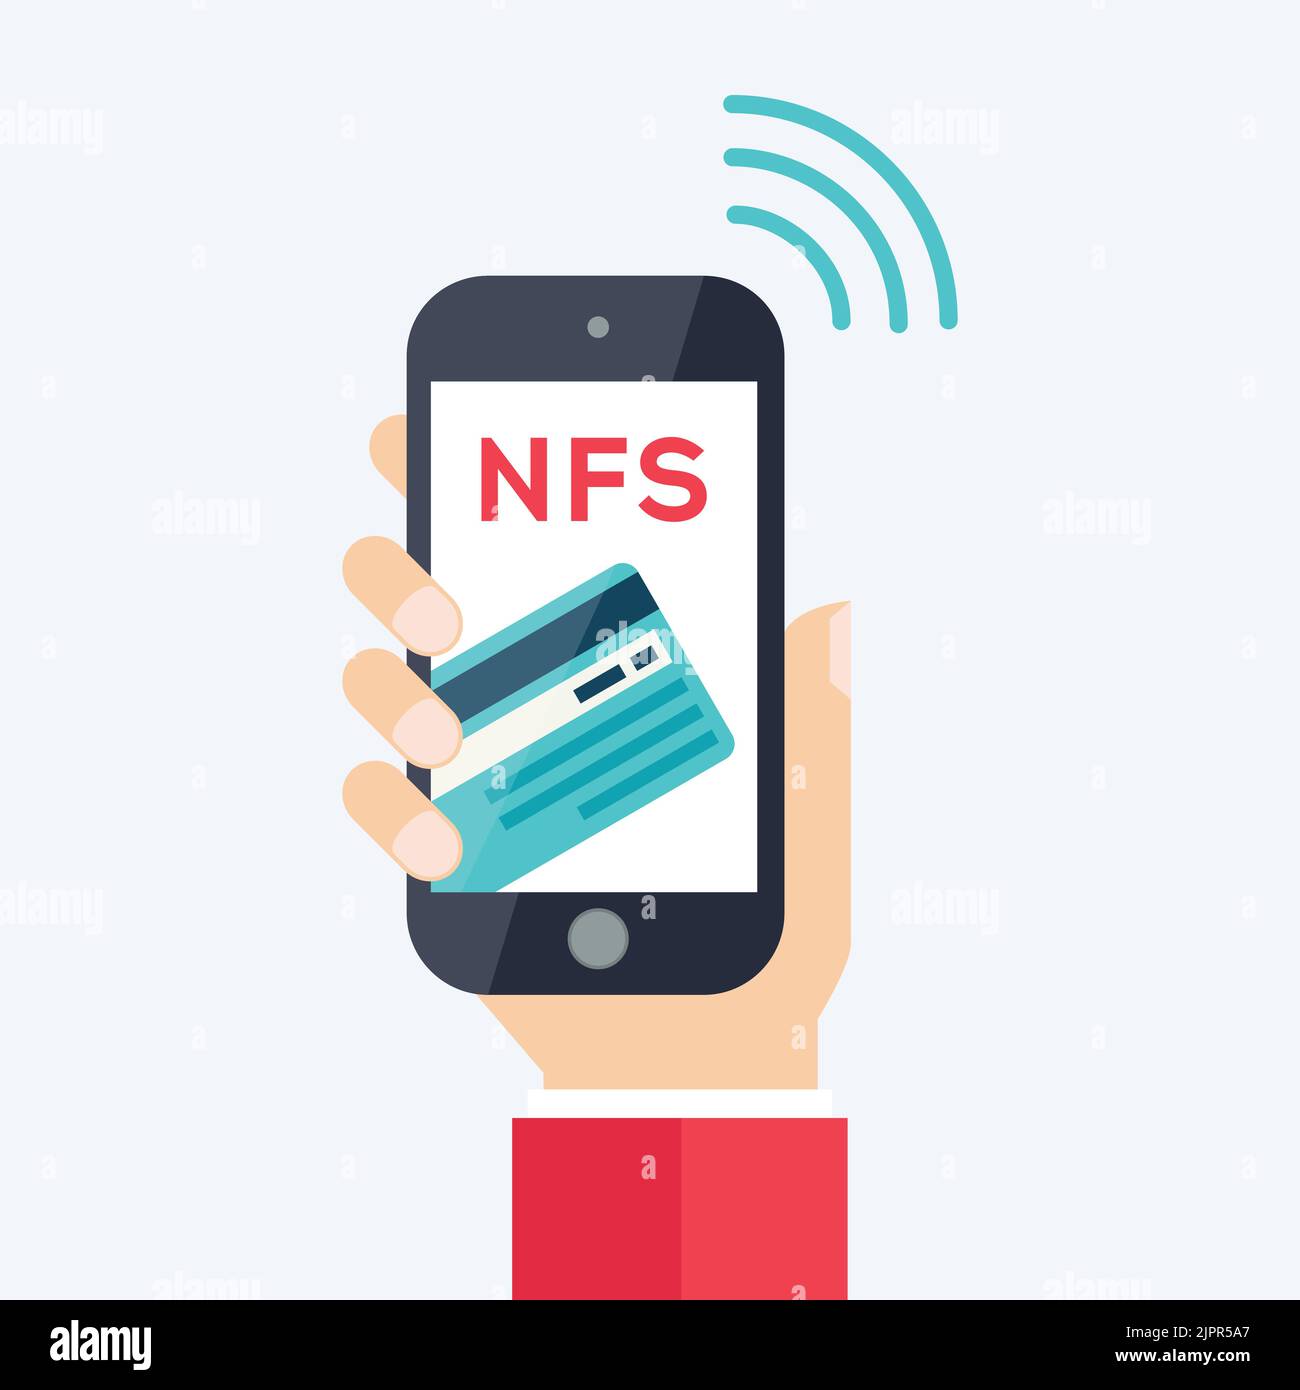 NFS Mobile Banking icon. Element of mobile banking for smart